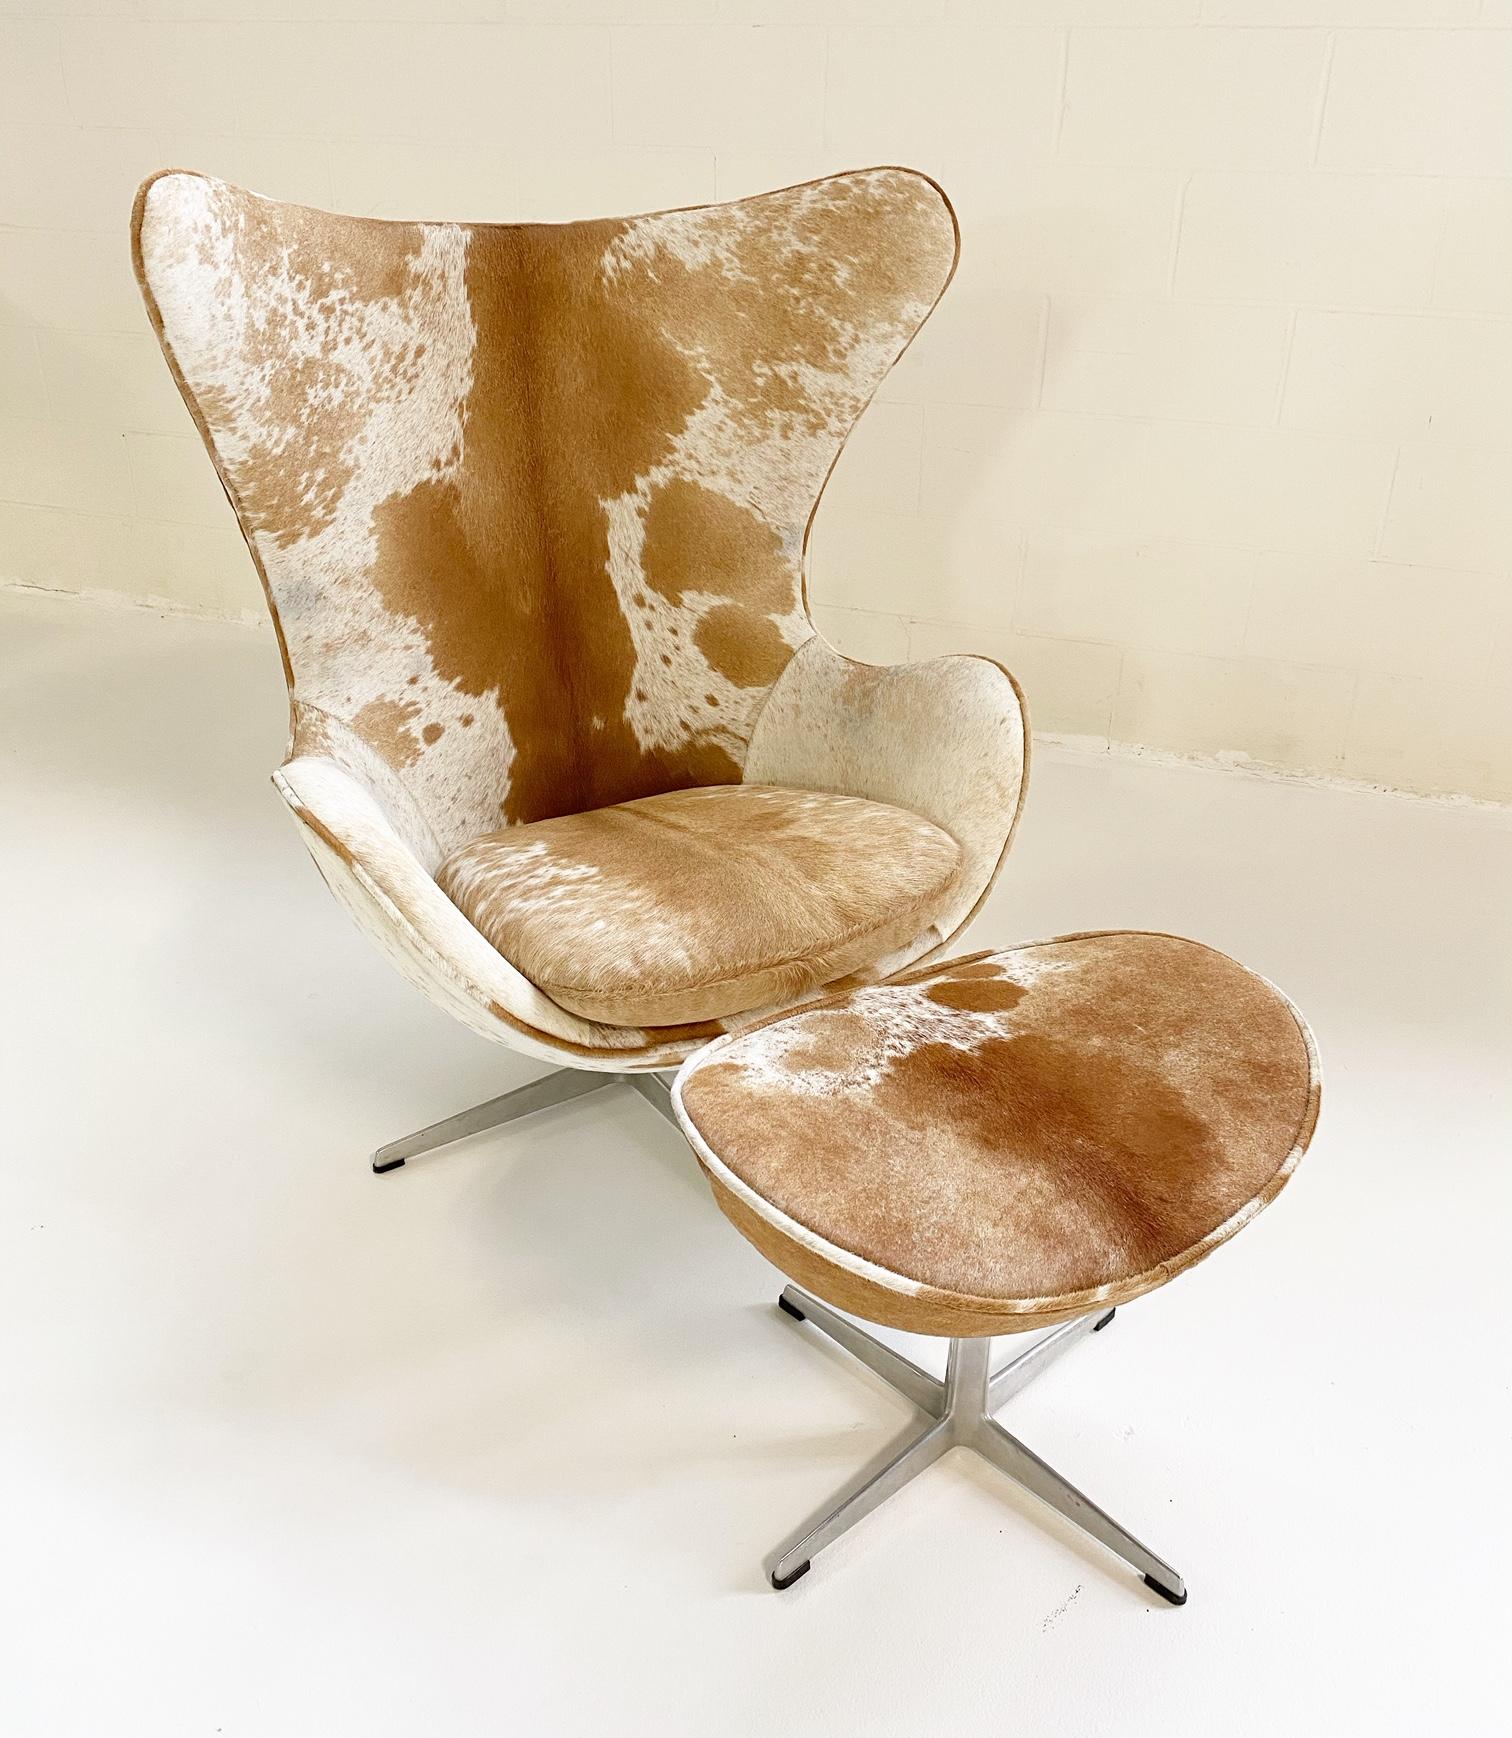 Ask any lover of midcentury furniture to name the top 5 iconic chairs of mcm design and we guarantee the egg chair would be on that list. The Forsyth design team was over the moon when we collected this amazing, original Arne Jacobsen egg chair.